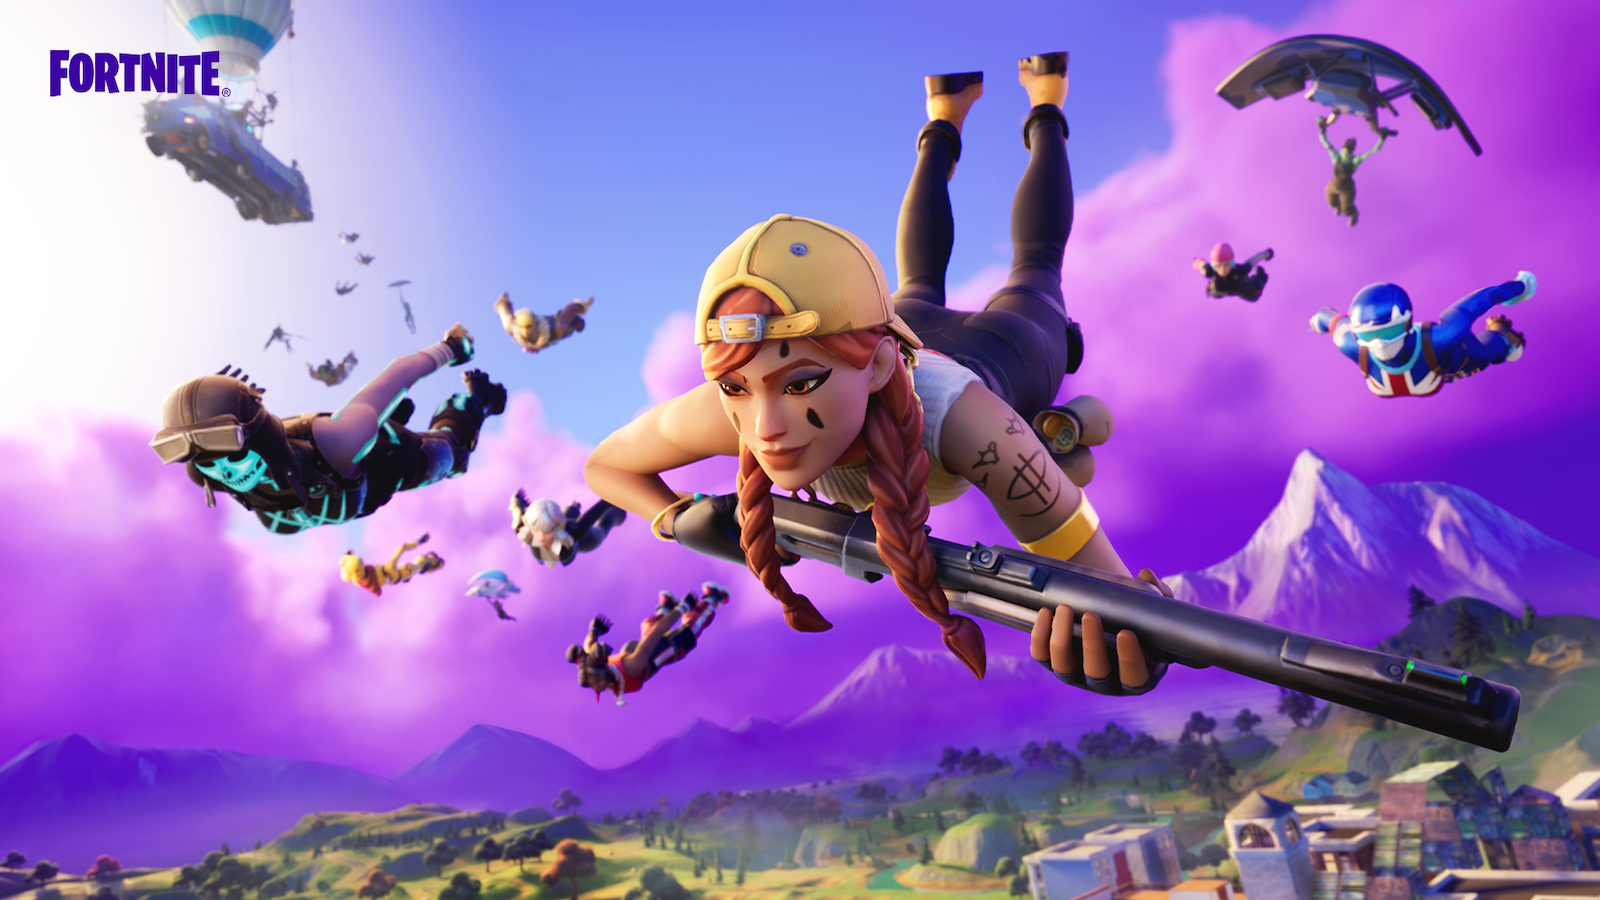 100 Thieves working on side game project in Fortnite engine alongside ...